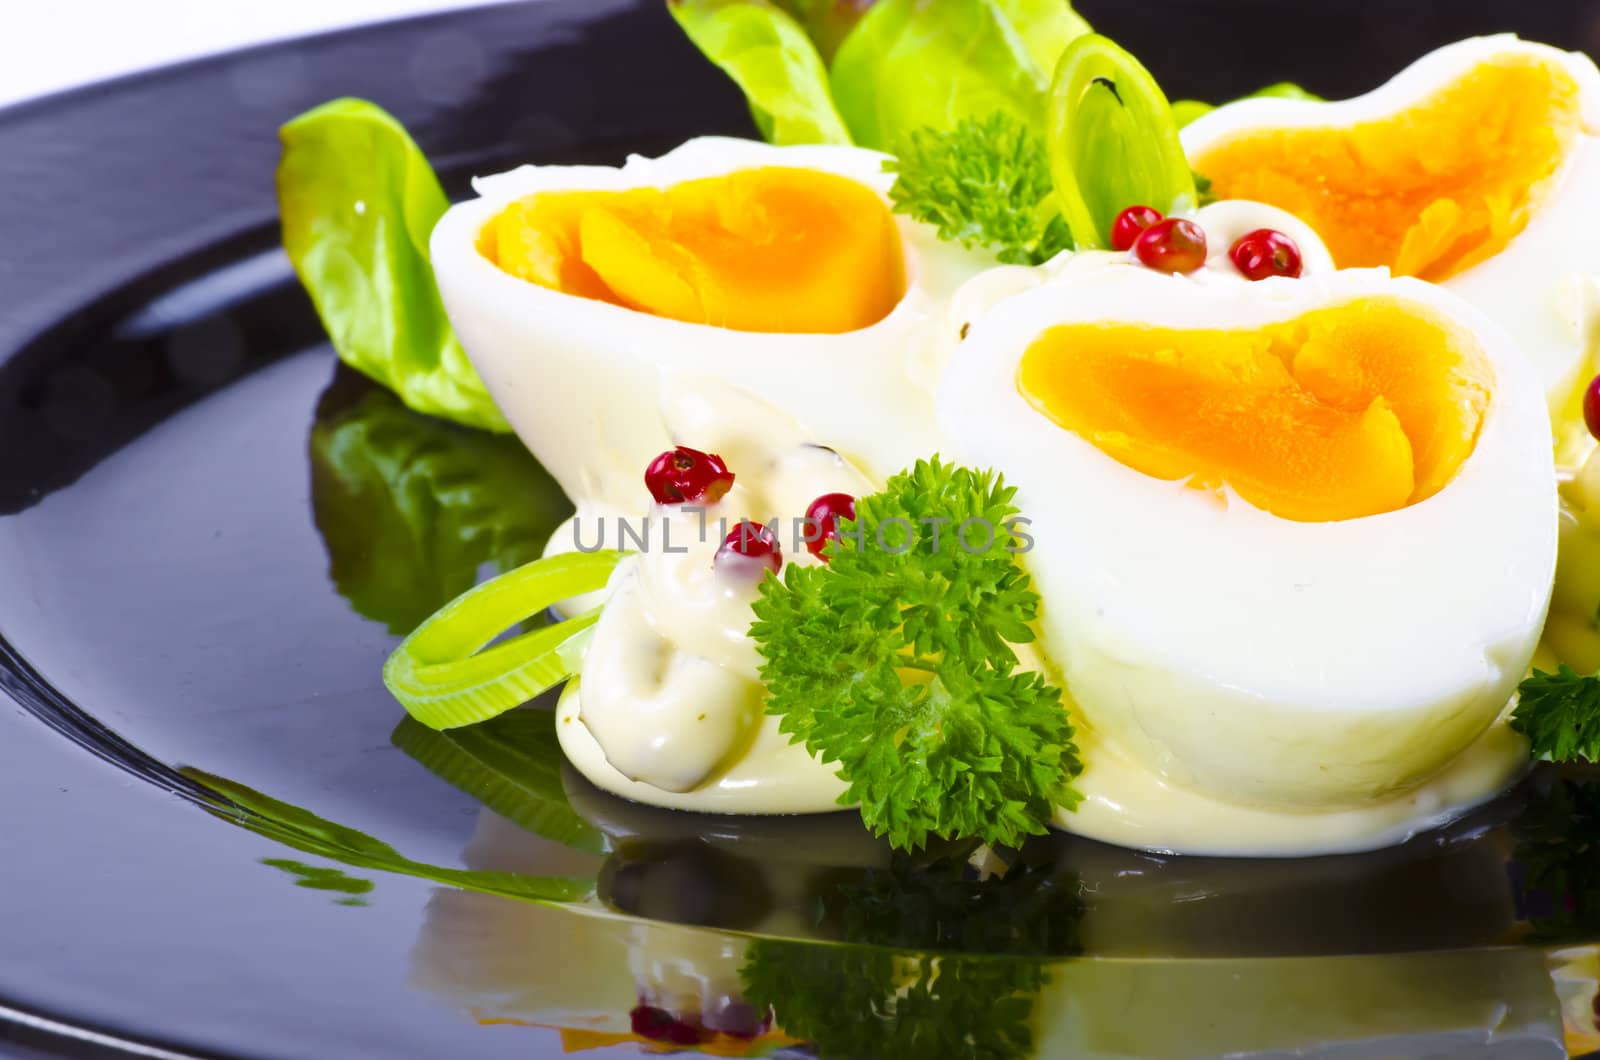 Boiled eggs are eggs (typically chickens' eggs) cooked by immersion in boiling water with their shells unbroken.